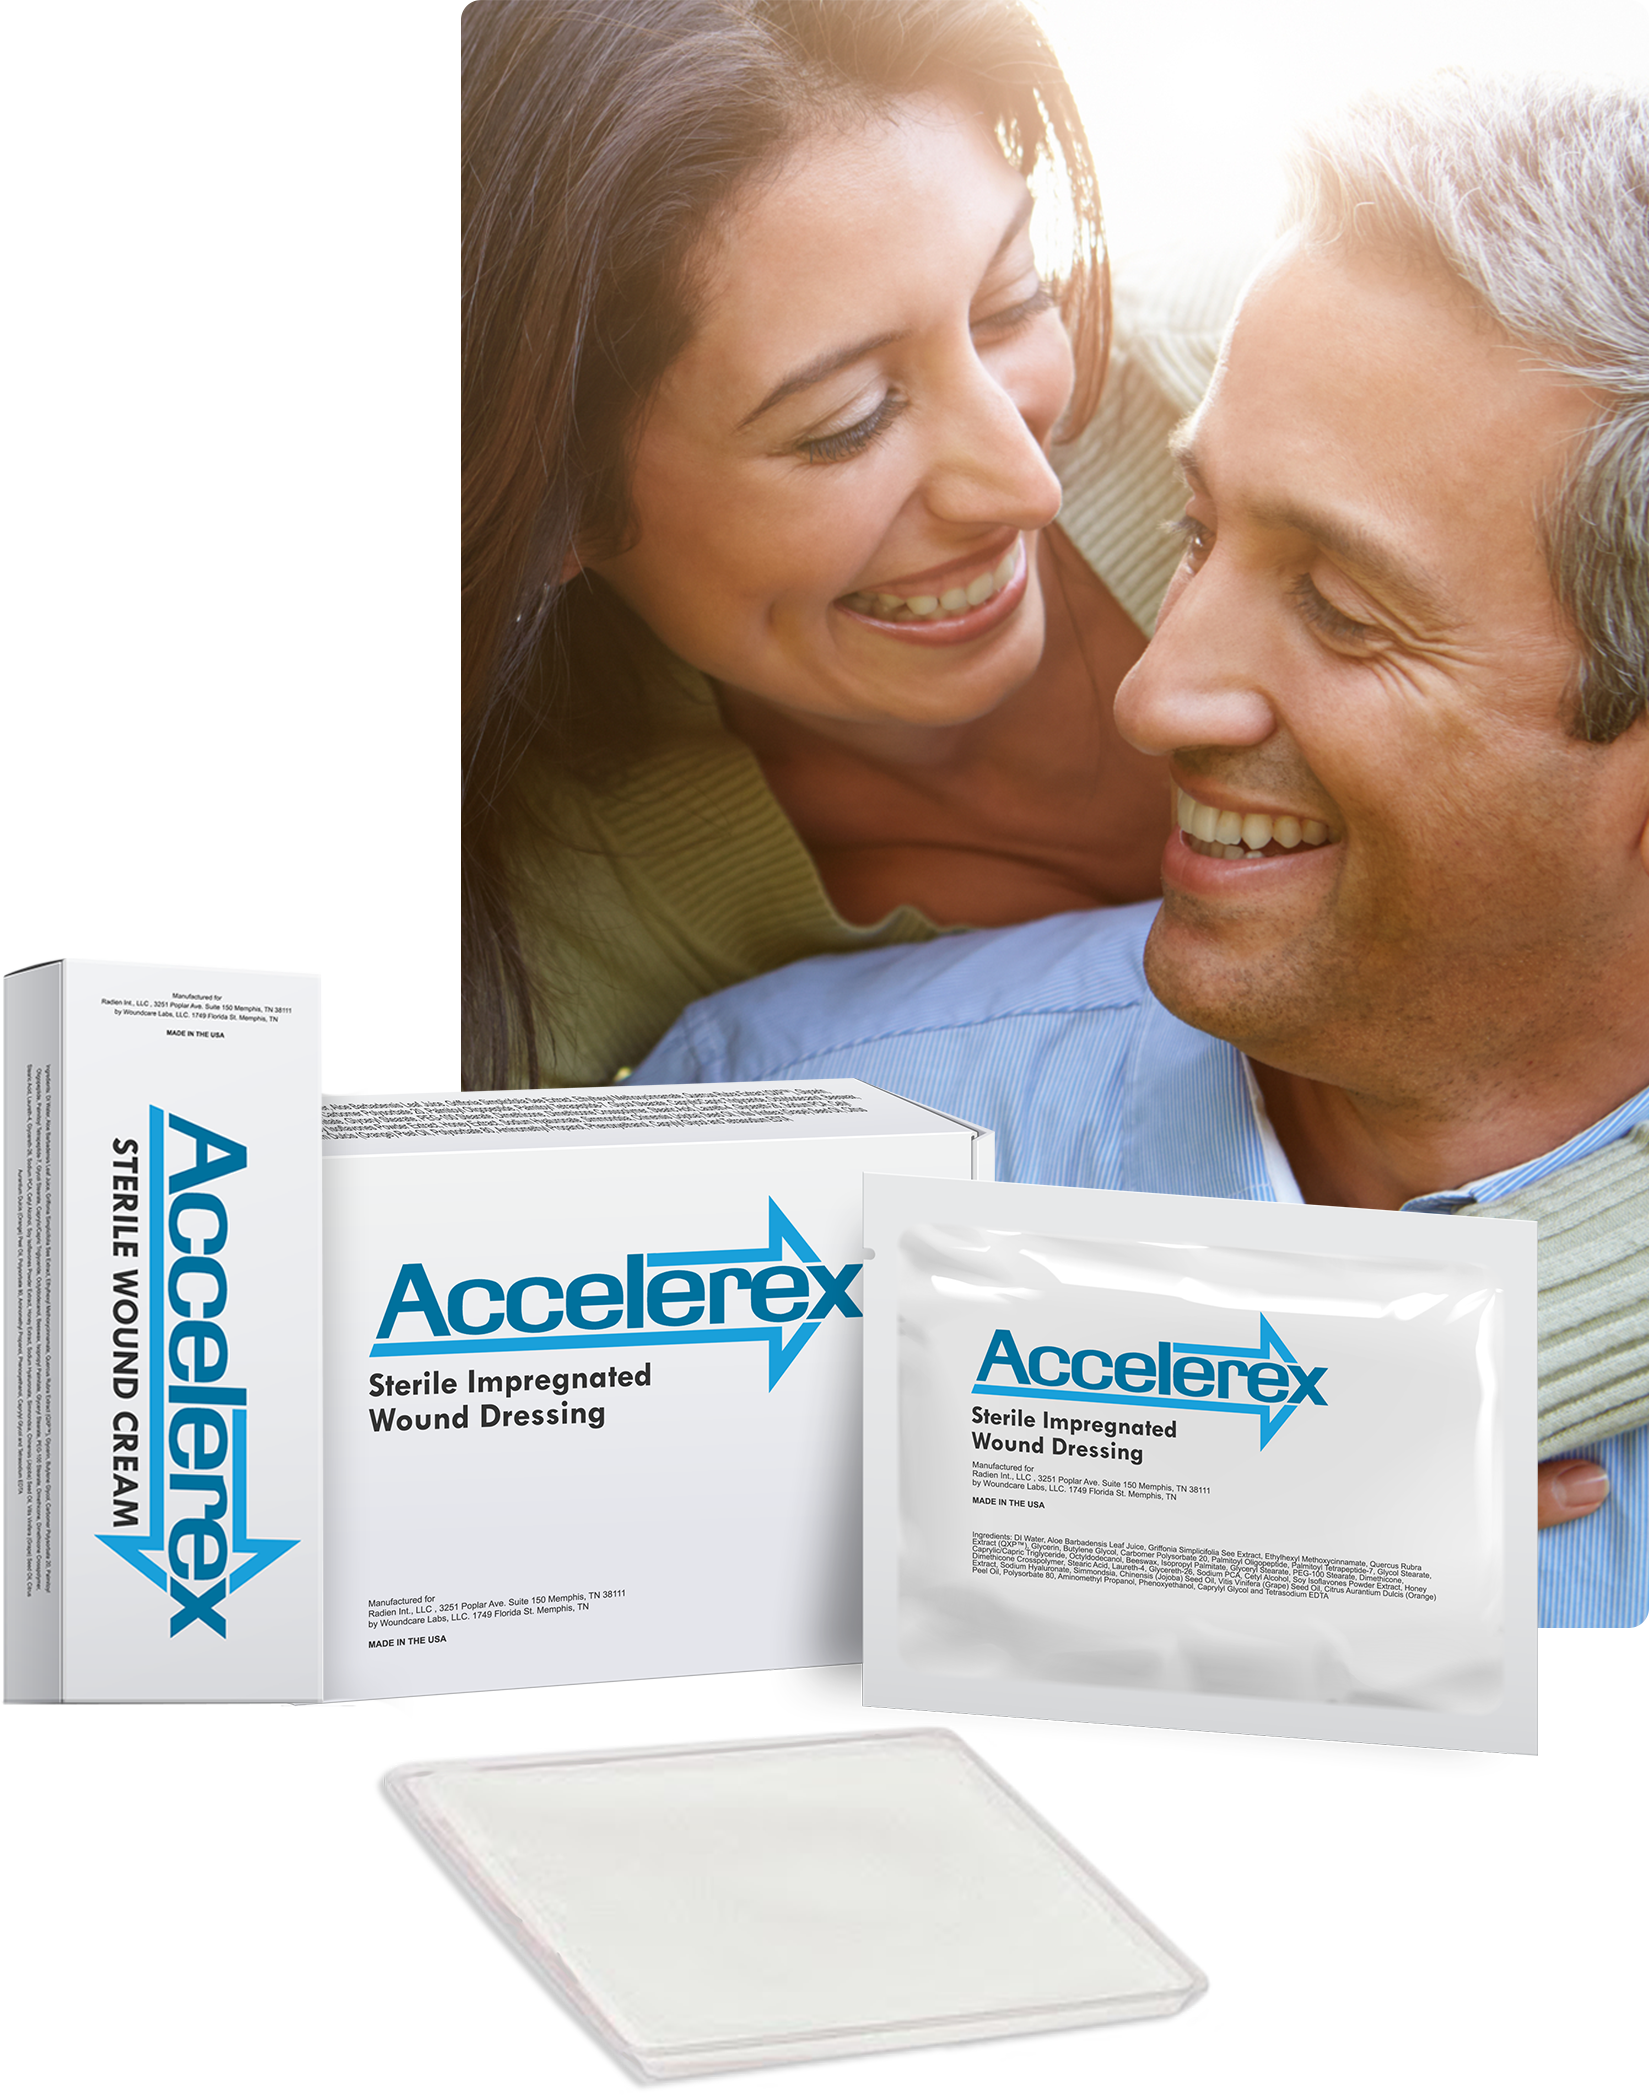 Accelerex products overlaid on photo of couple smiling